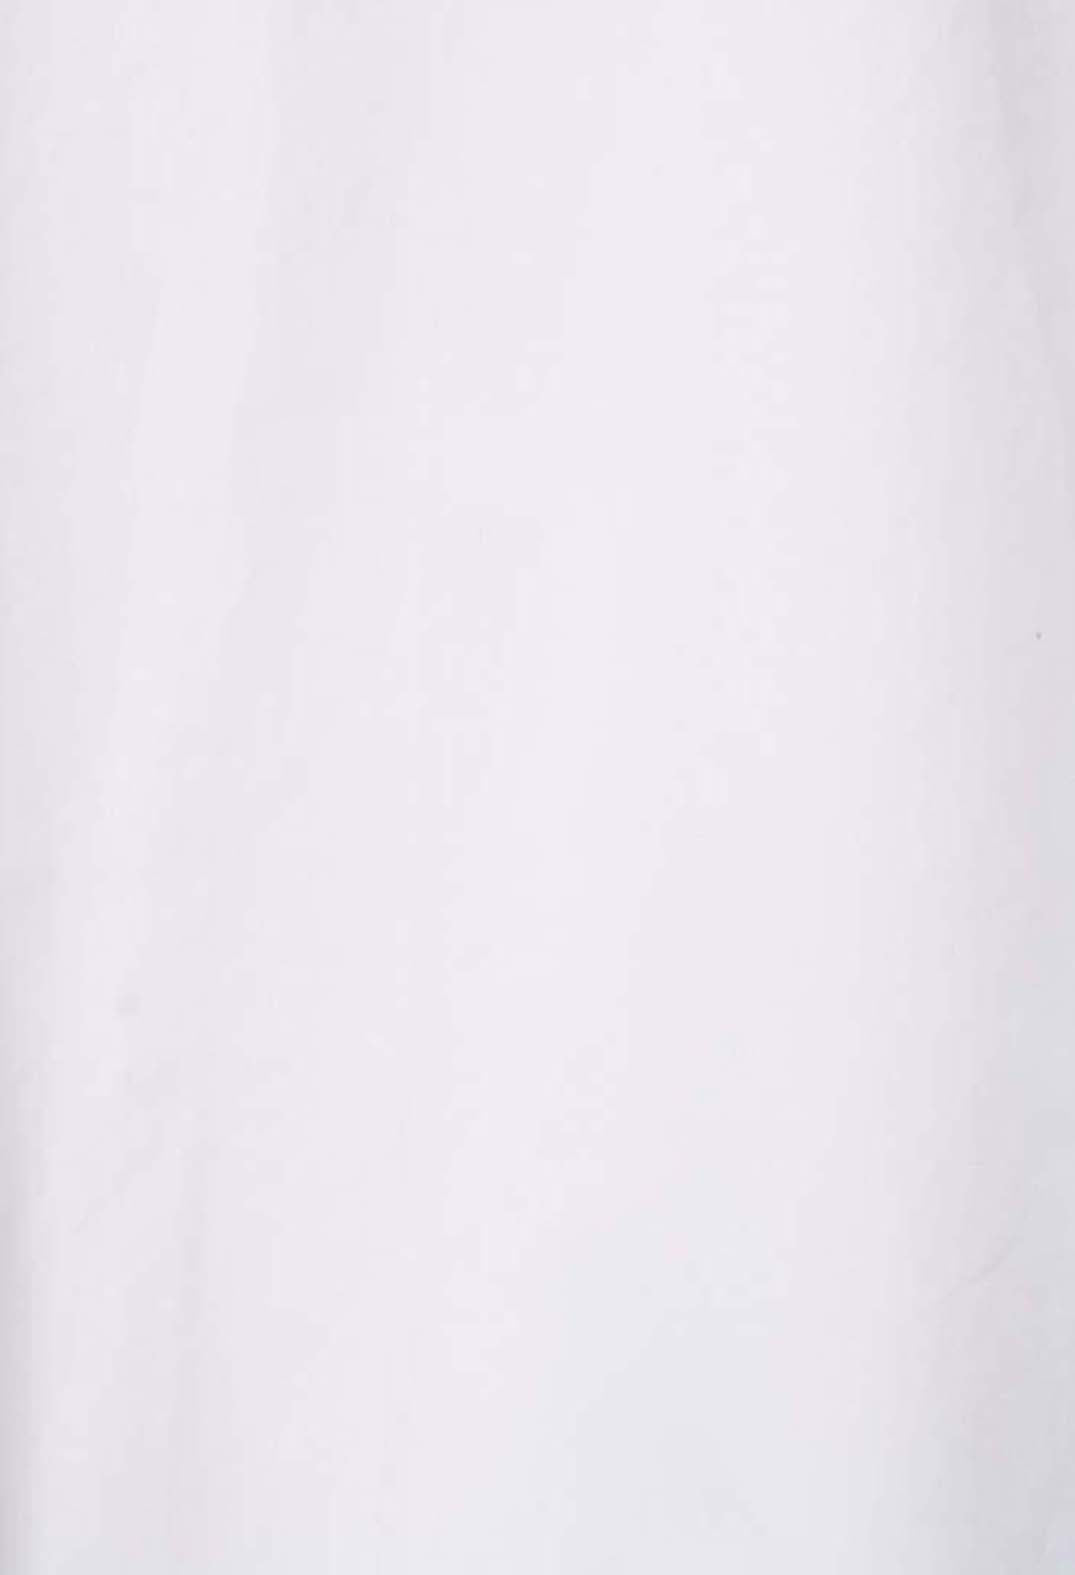 Flared Sleeved Top with Asymmetric Hem in White